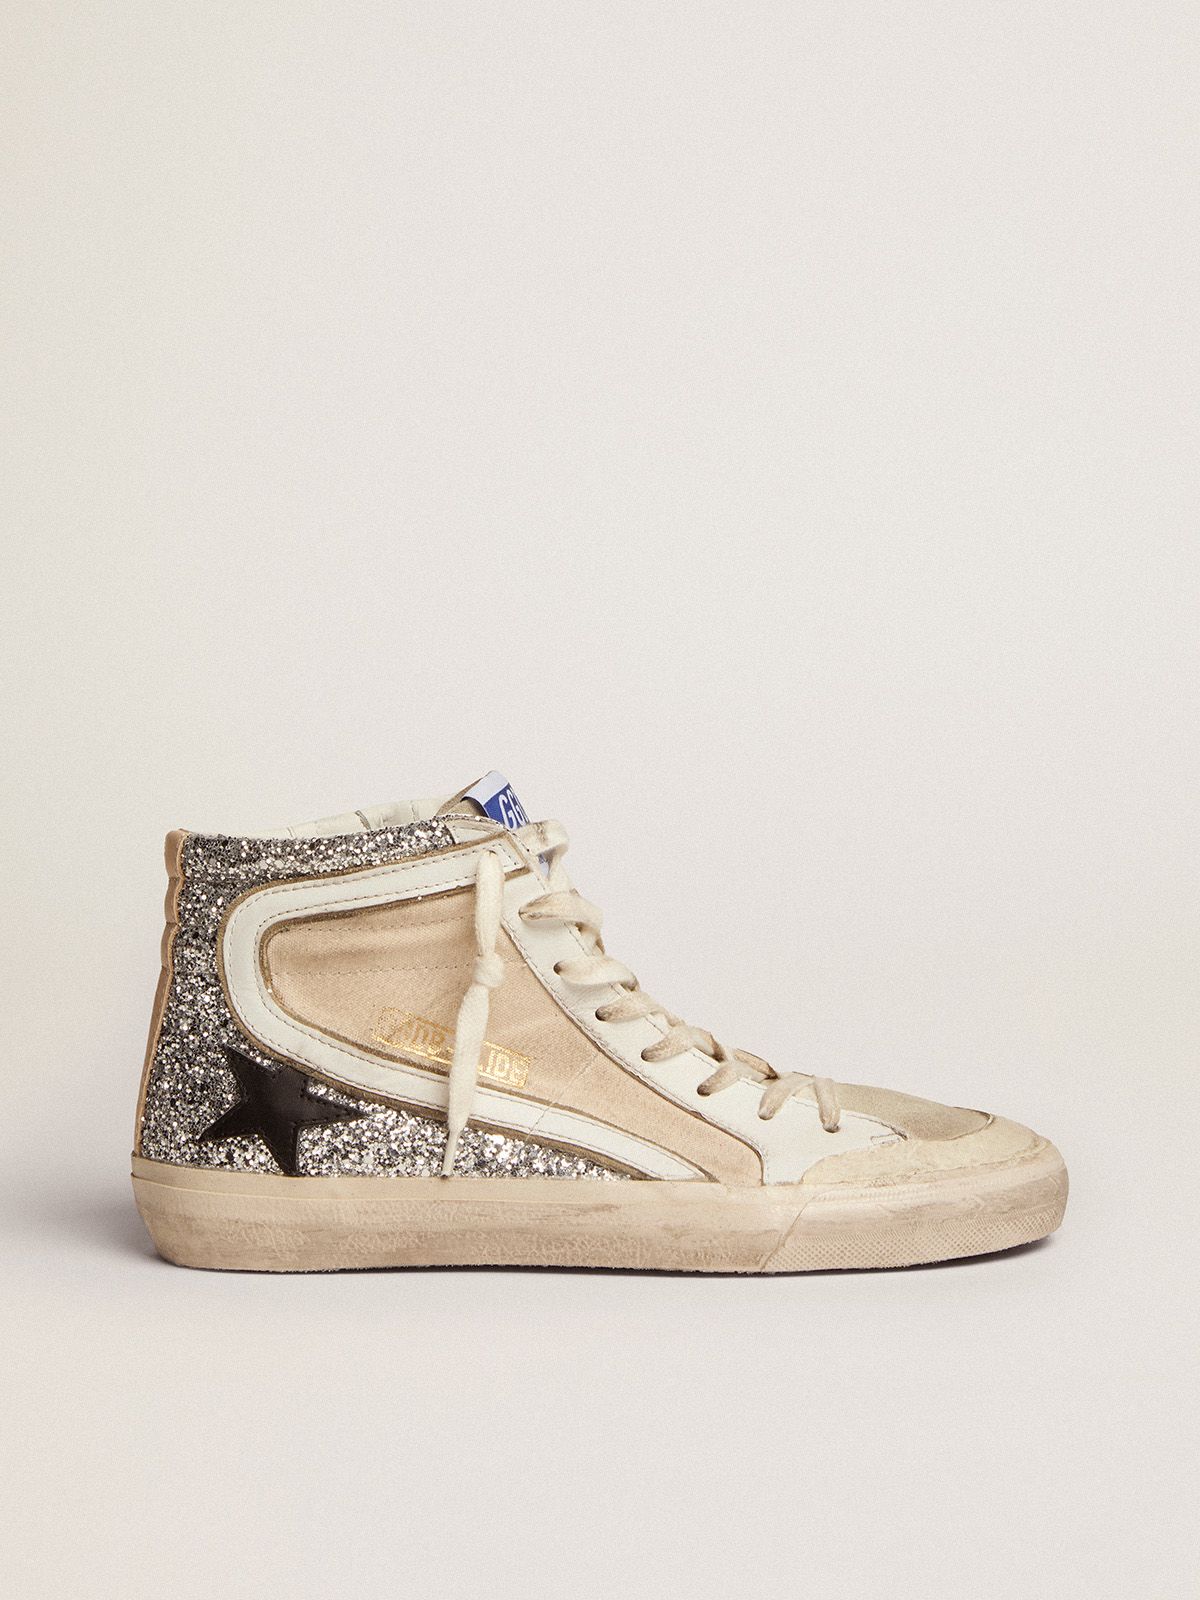 golden goose glitter star Penstar with leather canvas in sneakers silver black Slide cream-colored and